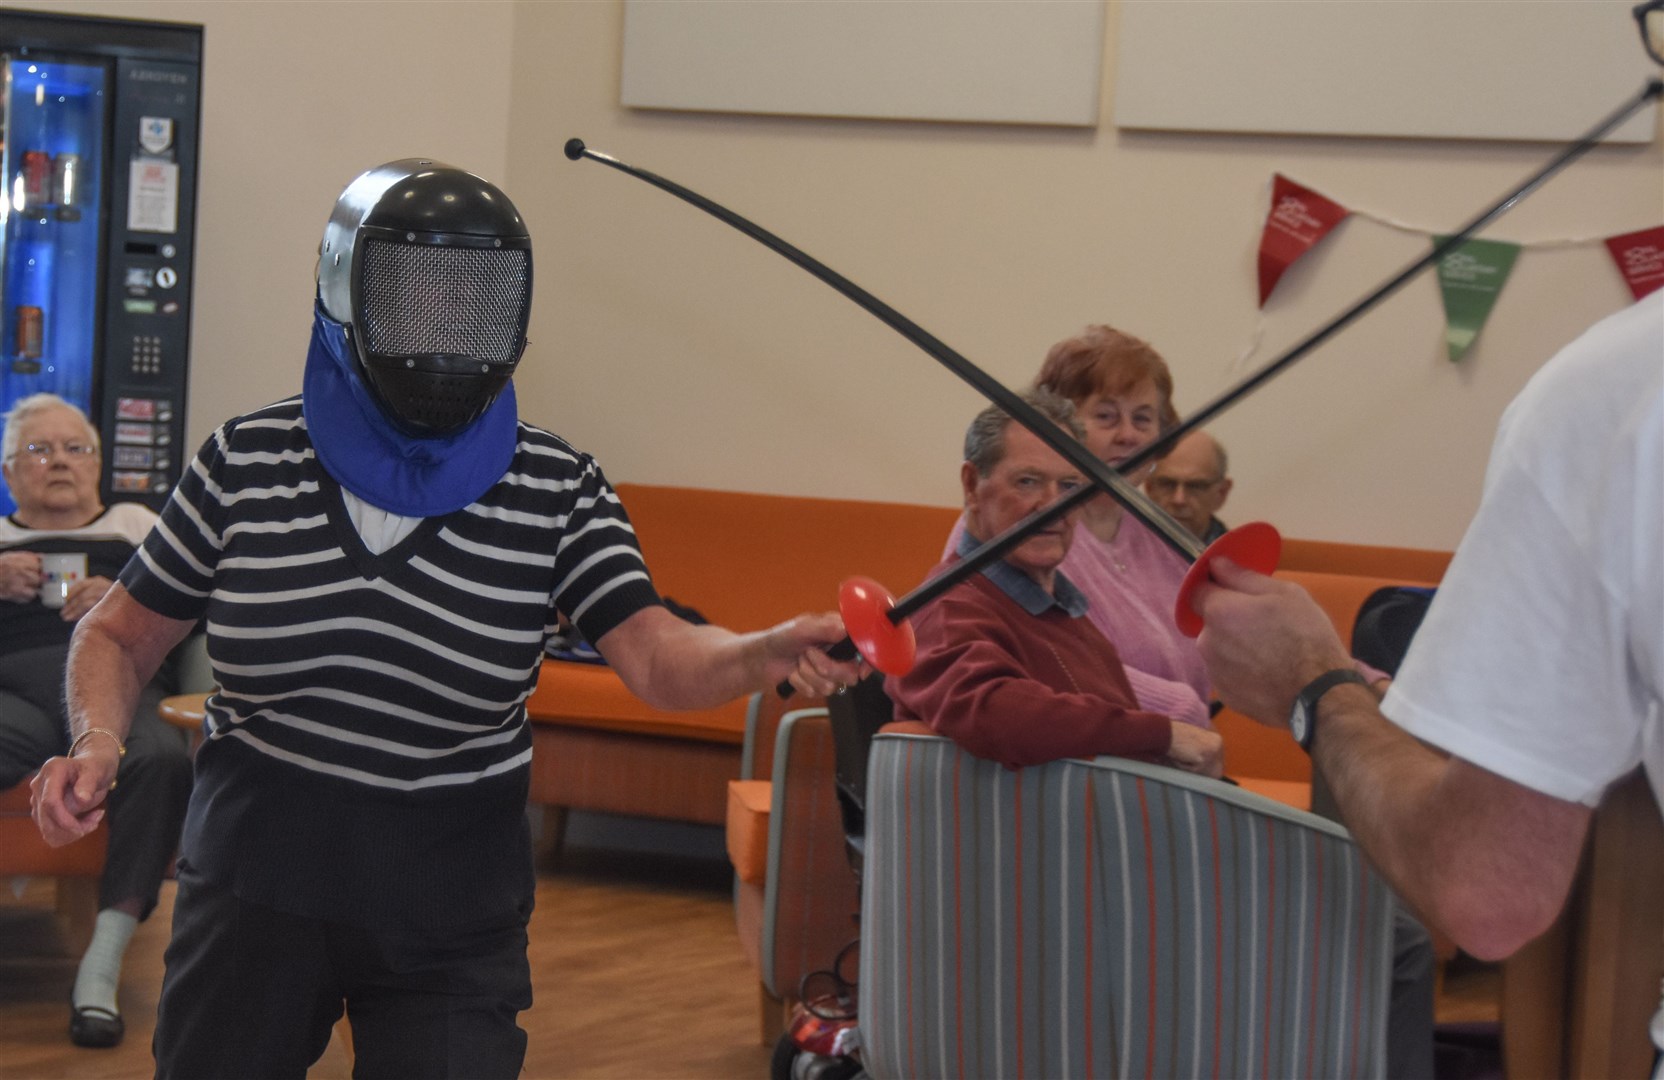 Margaret Rose Wood at the first fencing session held at Hanover Housing in Elgin.